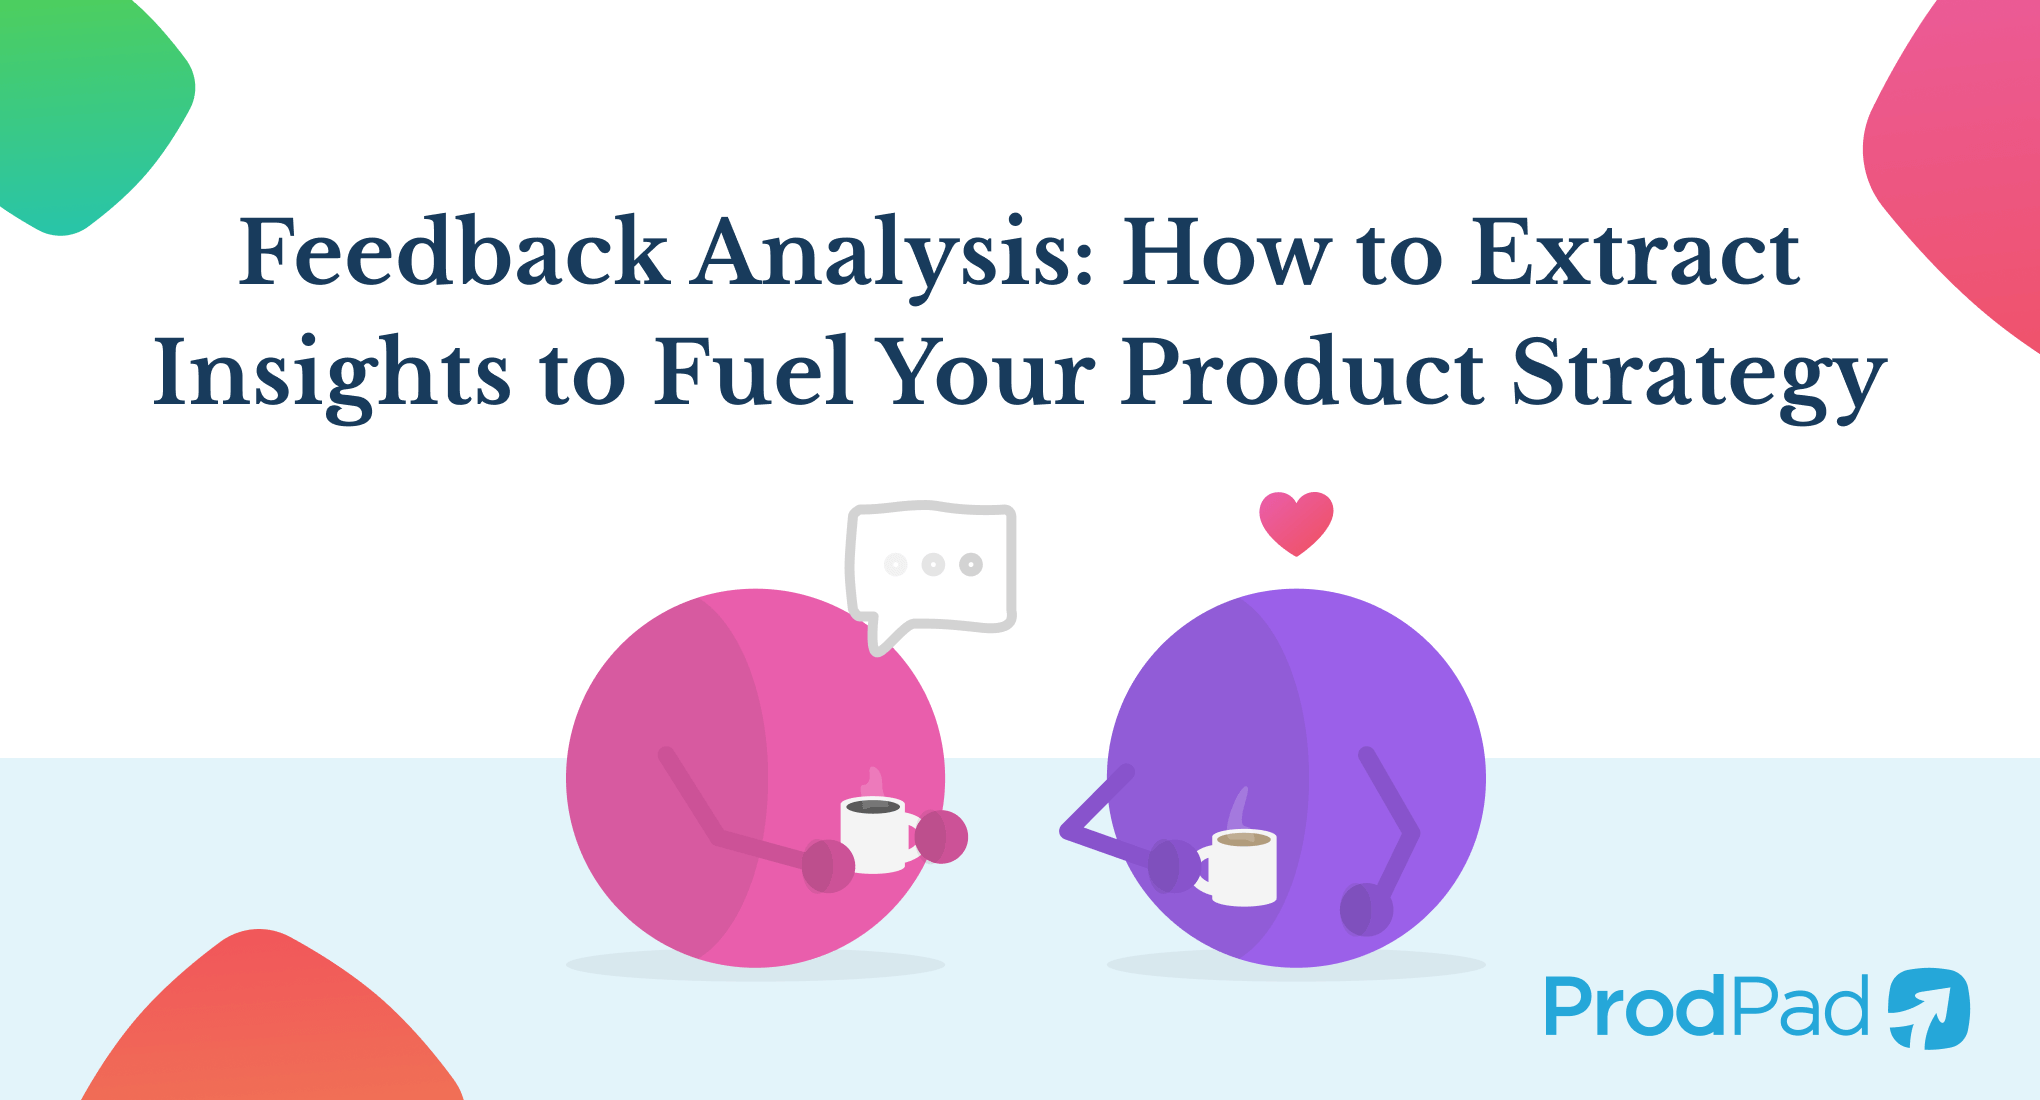 Feedback analysis: how to extract insights to fuel your product strategy (17 minute read)